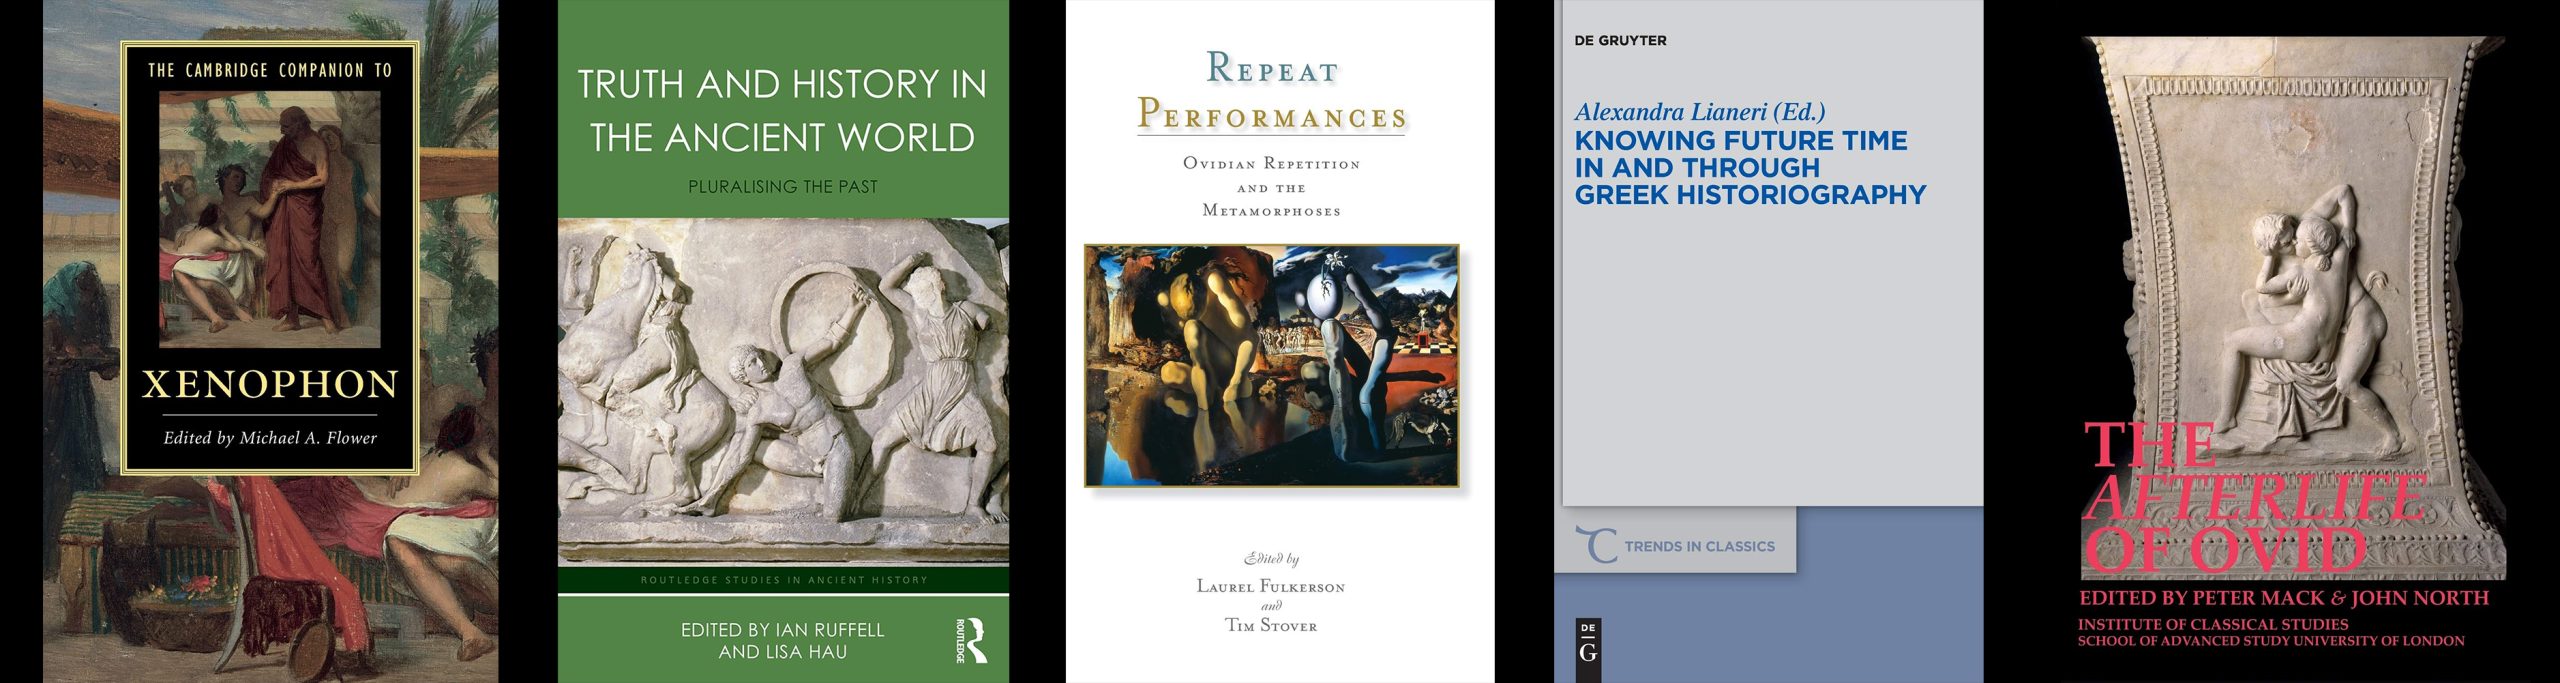 1. The Cambridge Companion to Xenophon. 2. Truth and History in the Ancient World: Pluralising the Past. 3. Repeat Performances: Ovidian Repetition and the Metamorphoses. 4. Knowing Future Time in and through Greek Historiography. 5. The Afterlife of Ovid.